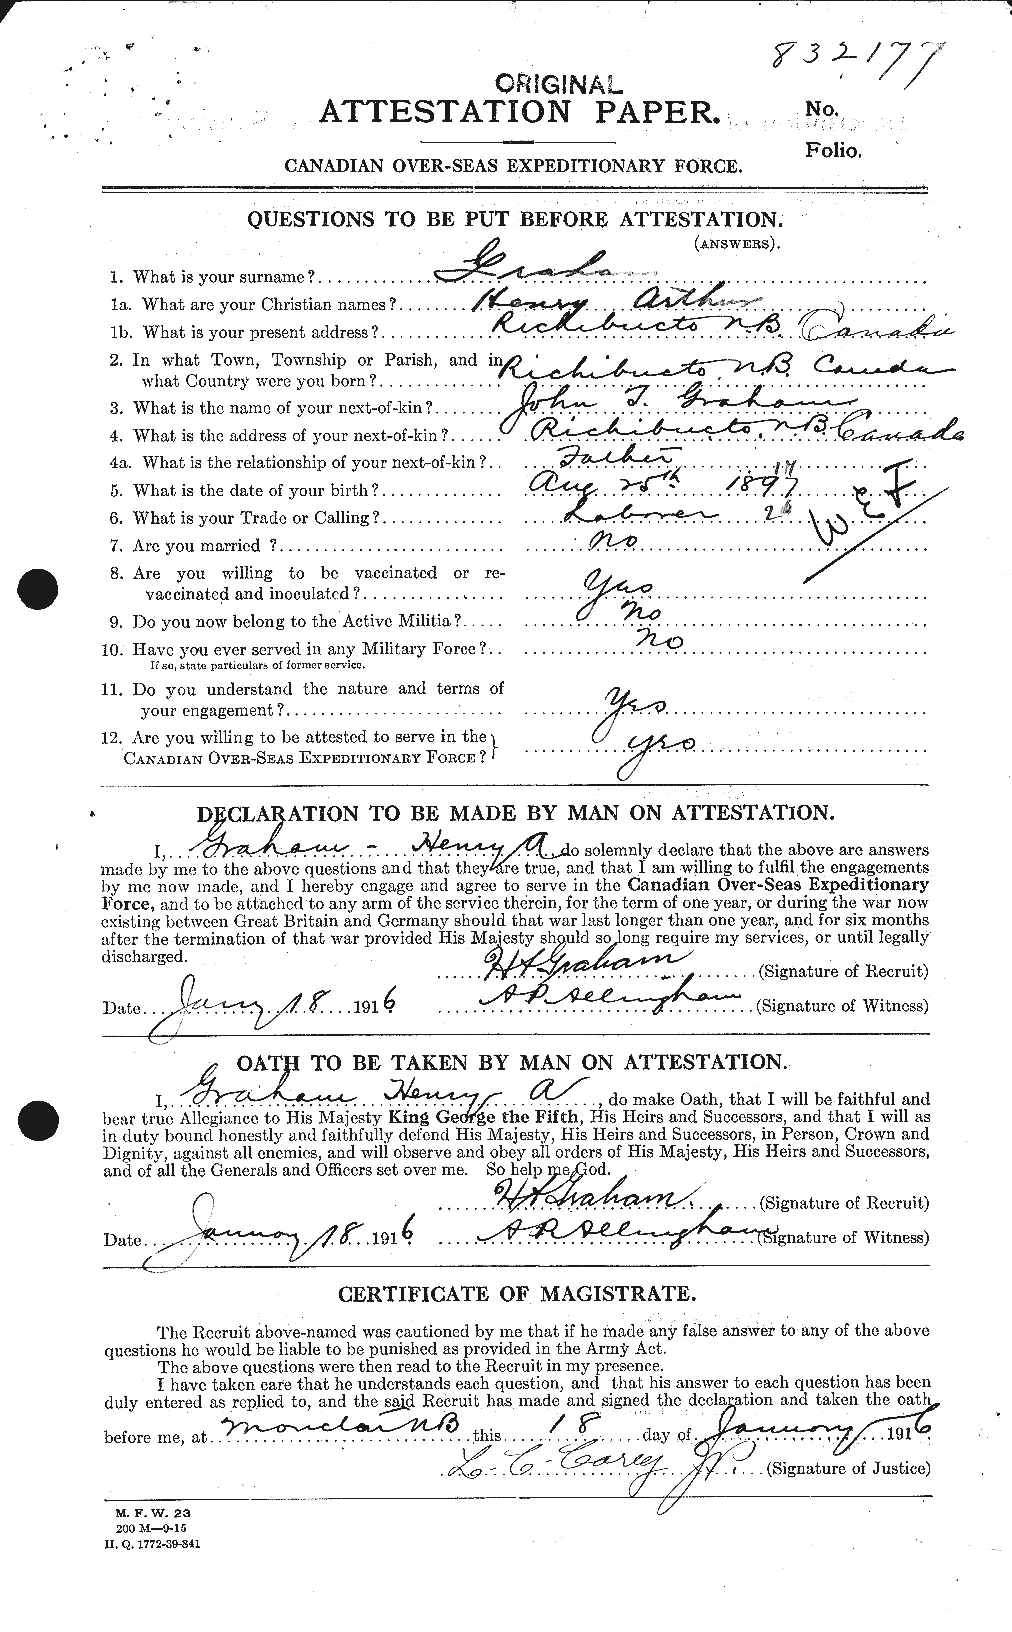 Personnel Records of the First World War - CEF 357734a